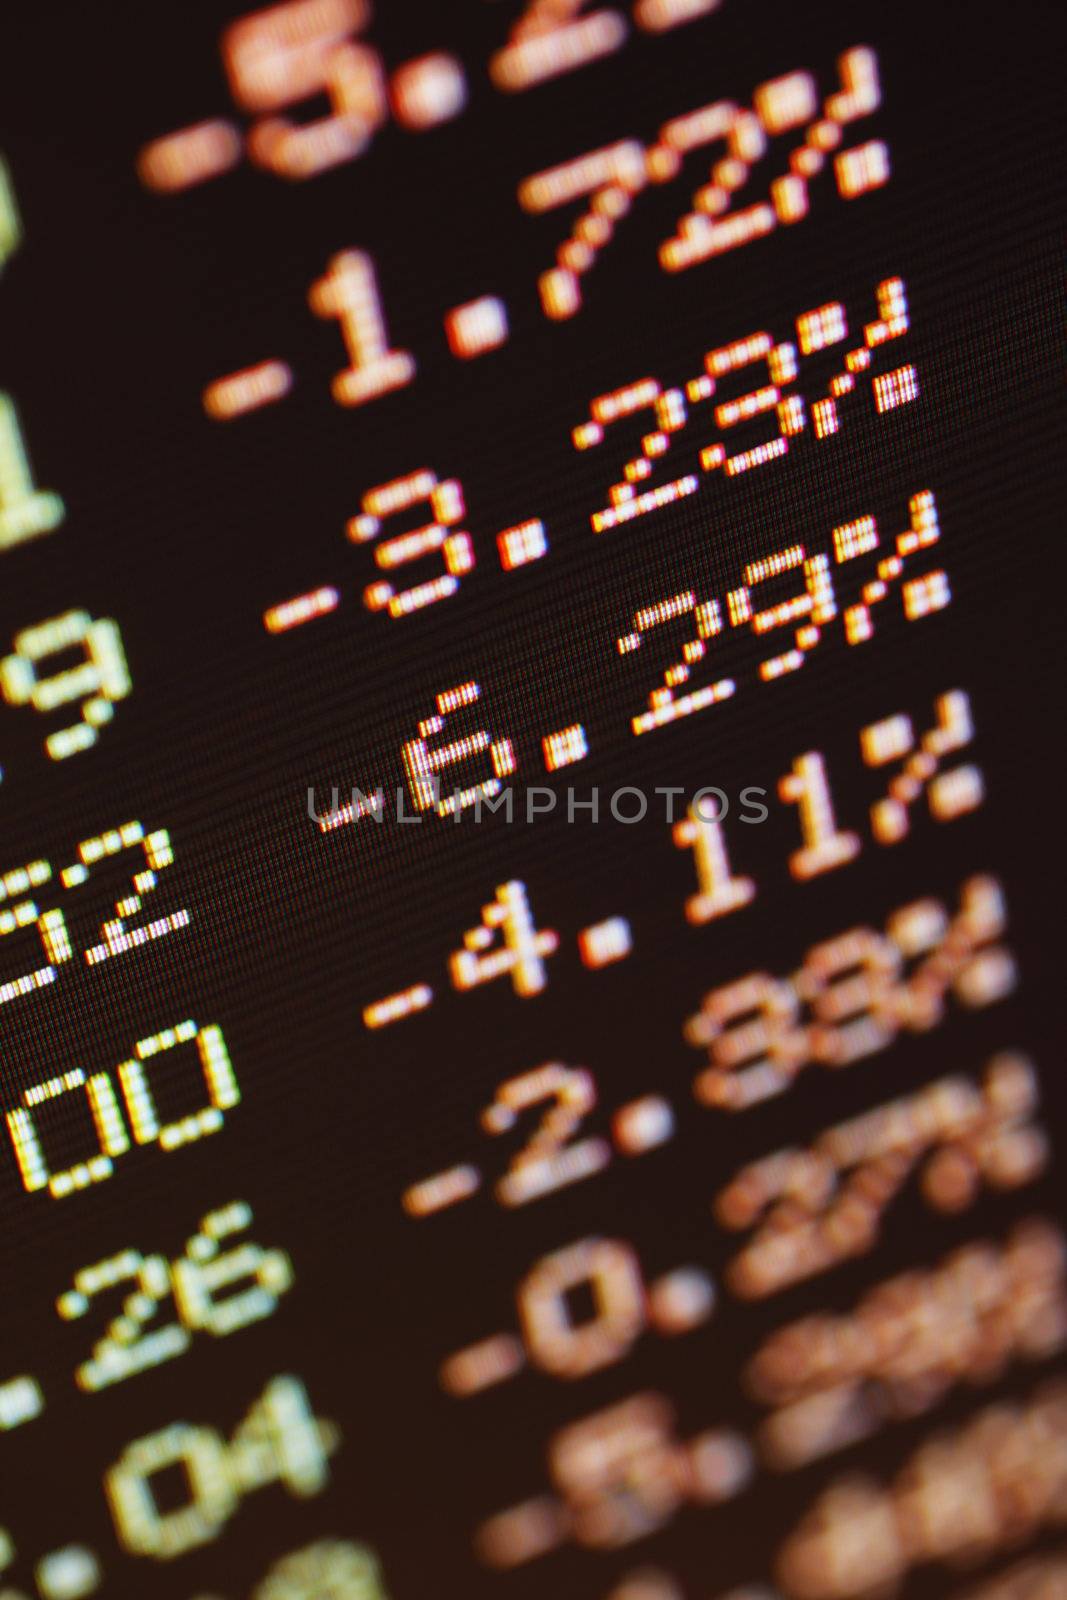 Negative financial stock data on a LCD screen